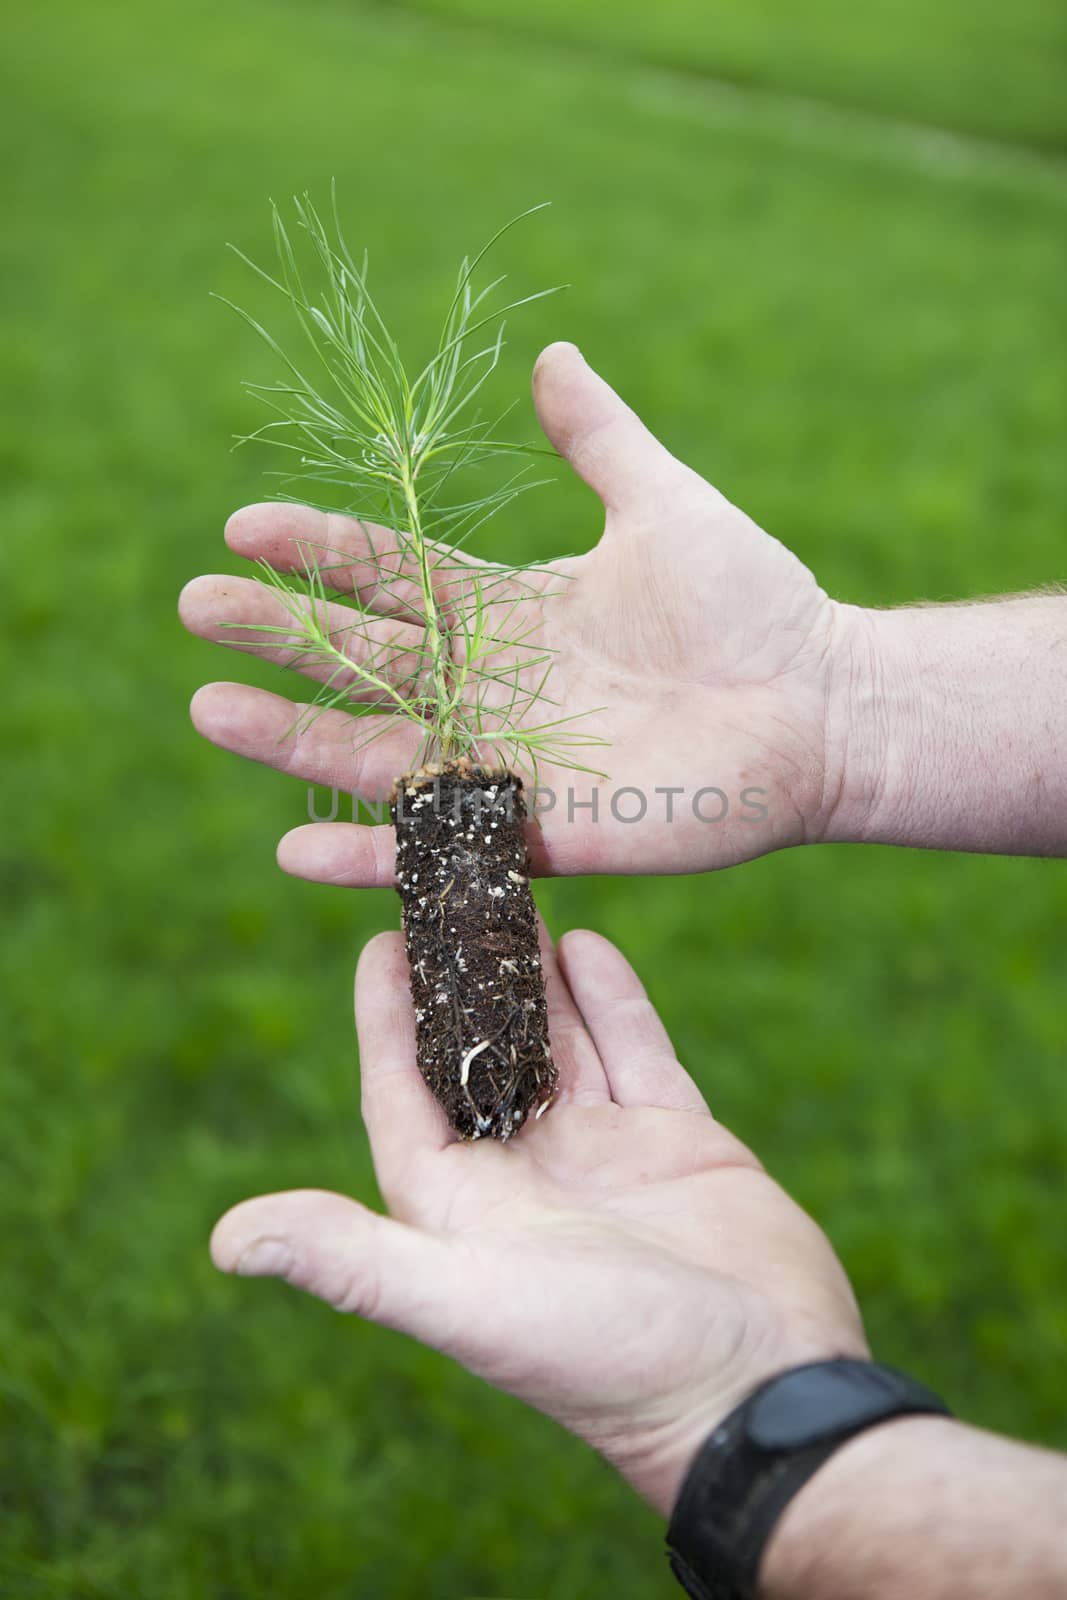 A Lodge Pole Pine seedling in a grower's weathered anr soiled hands, with thousands of seedlings in the background earmarked for reforestation projects.  The Reforestation industry is part of the global warming solution.